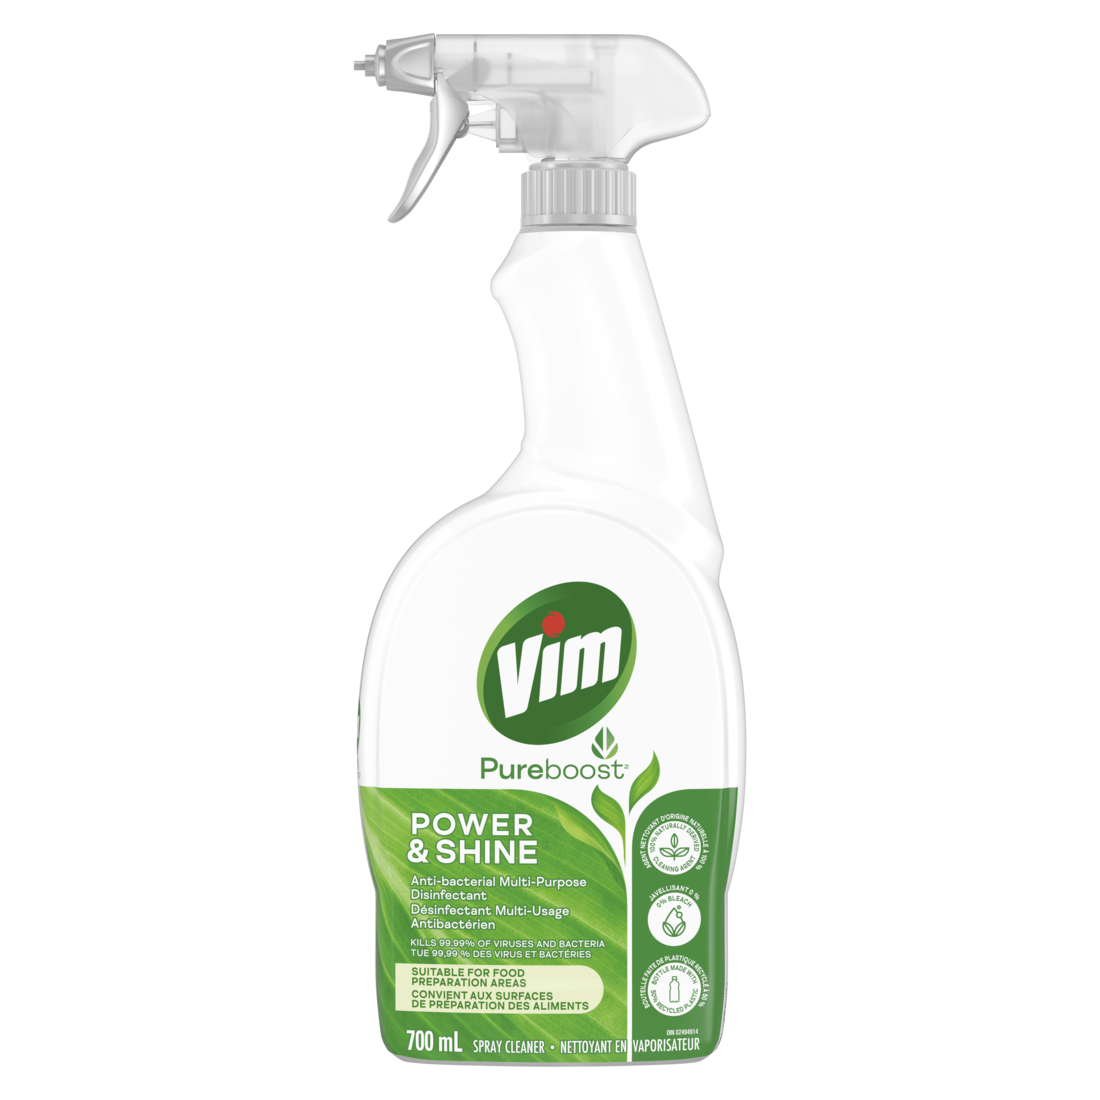 Vim (cleaning product) - Wikipedia